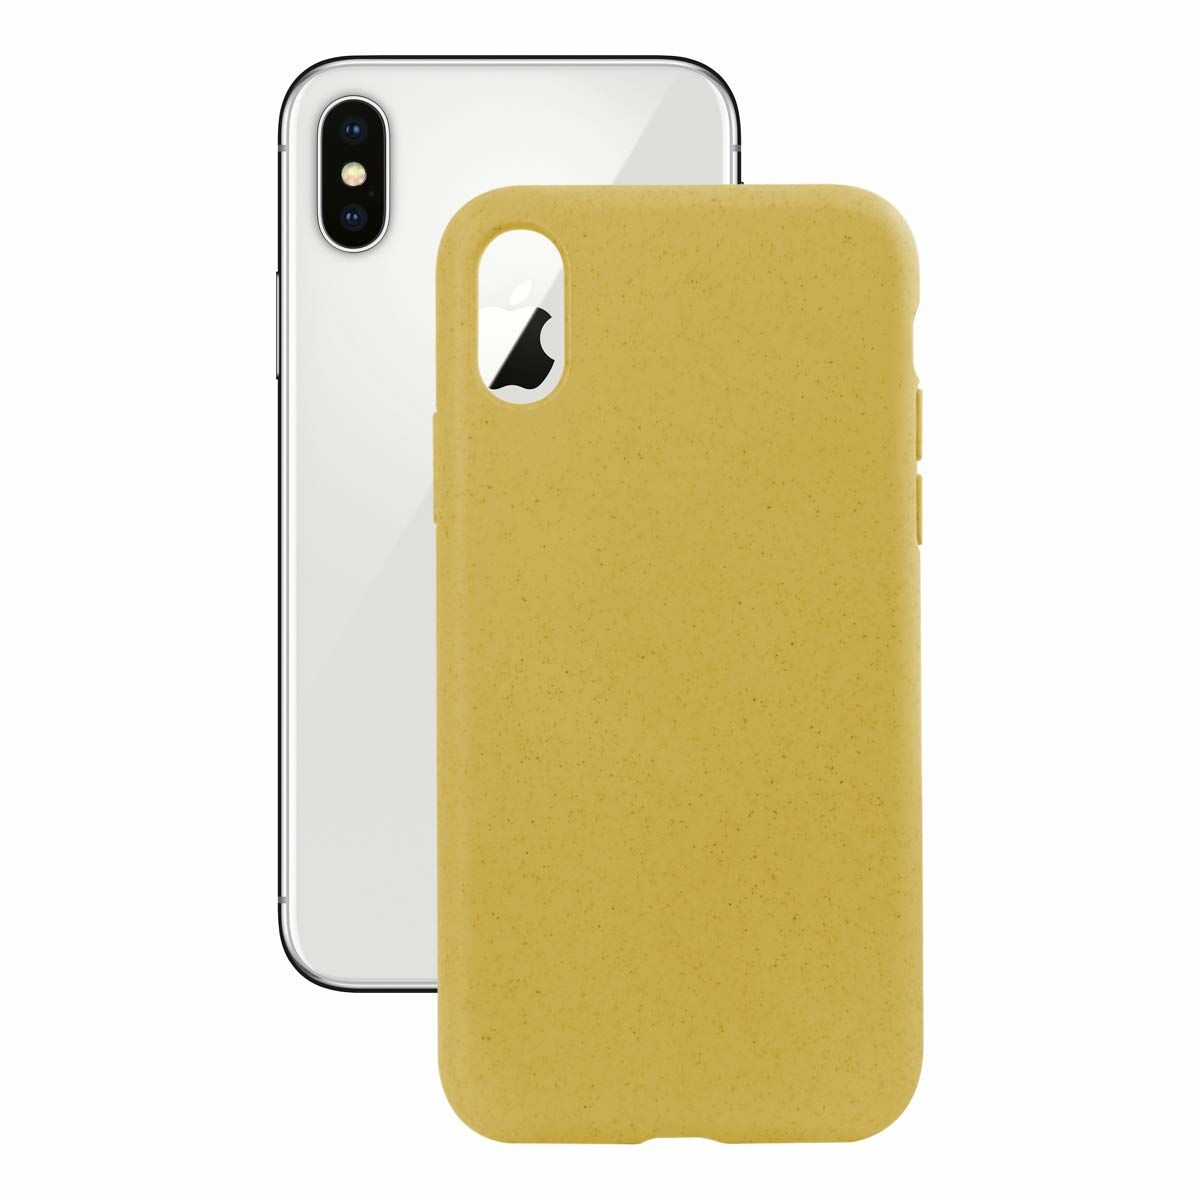 Mobile cover Iphone X KSIX Eco-Friendly Iphone X, XS